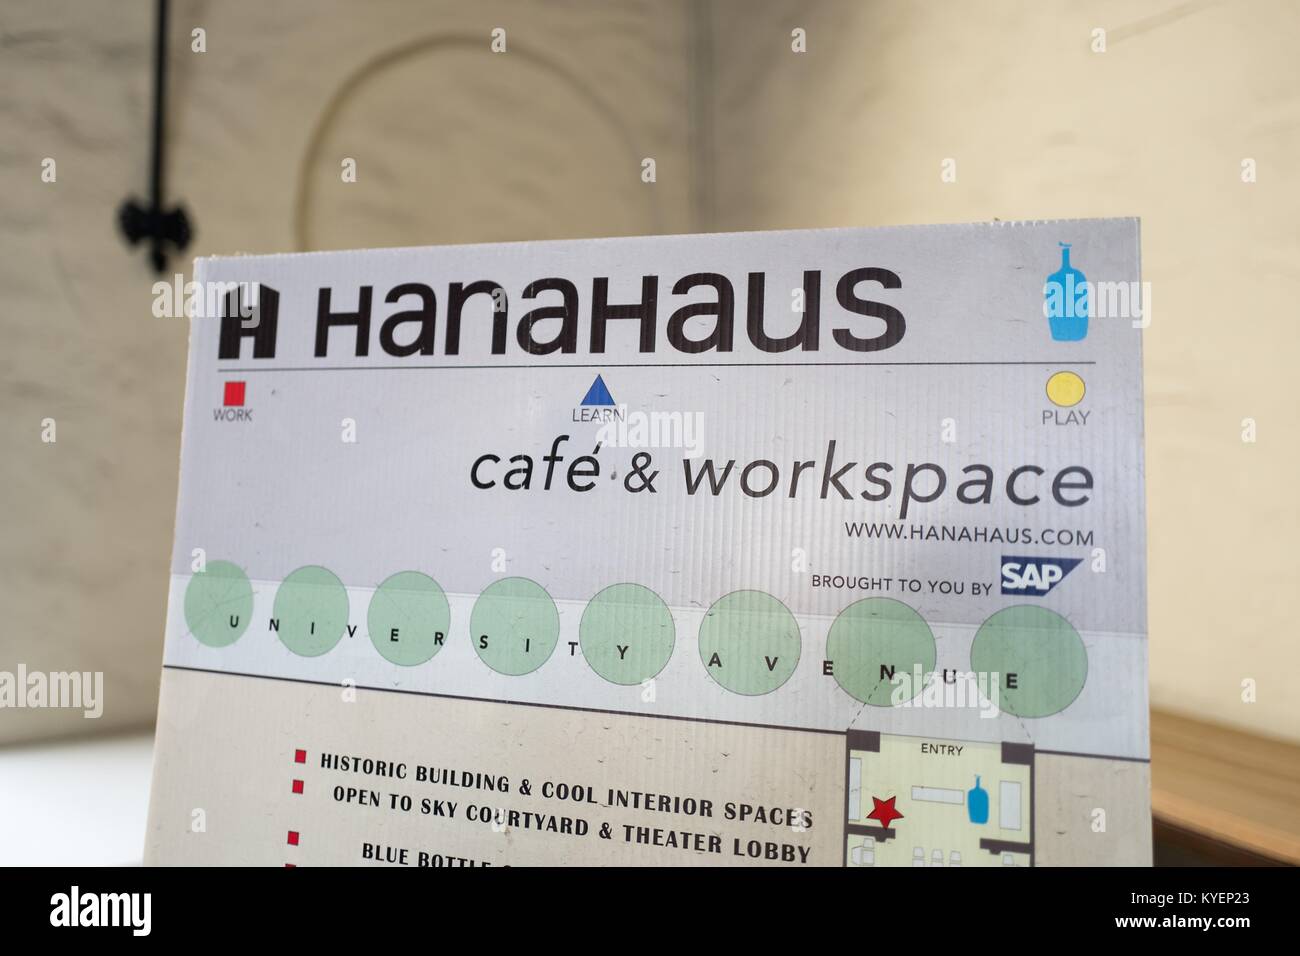 Close-up of sign for HanaHouse co-working space, created by German company SAP, at the Blue Bottle Coffee shop in Silicon Valley, Palo Alto, California, part of an adaptive reuse which turned the former Varsity Theater into an upscale cafe and HanaHouse co-working space, November 14, 2017. () Stock Photo